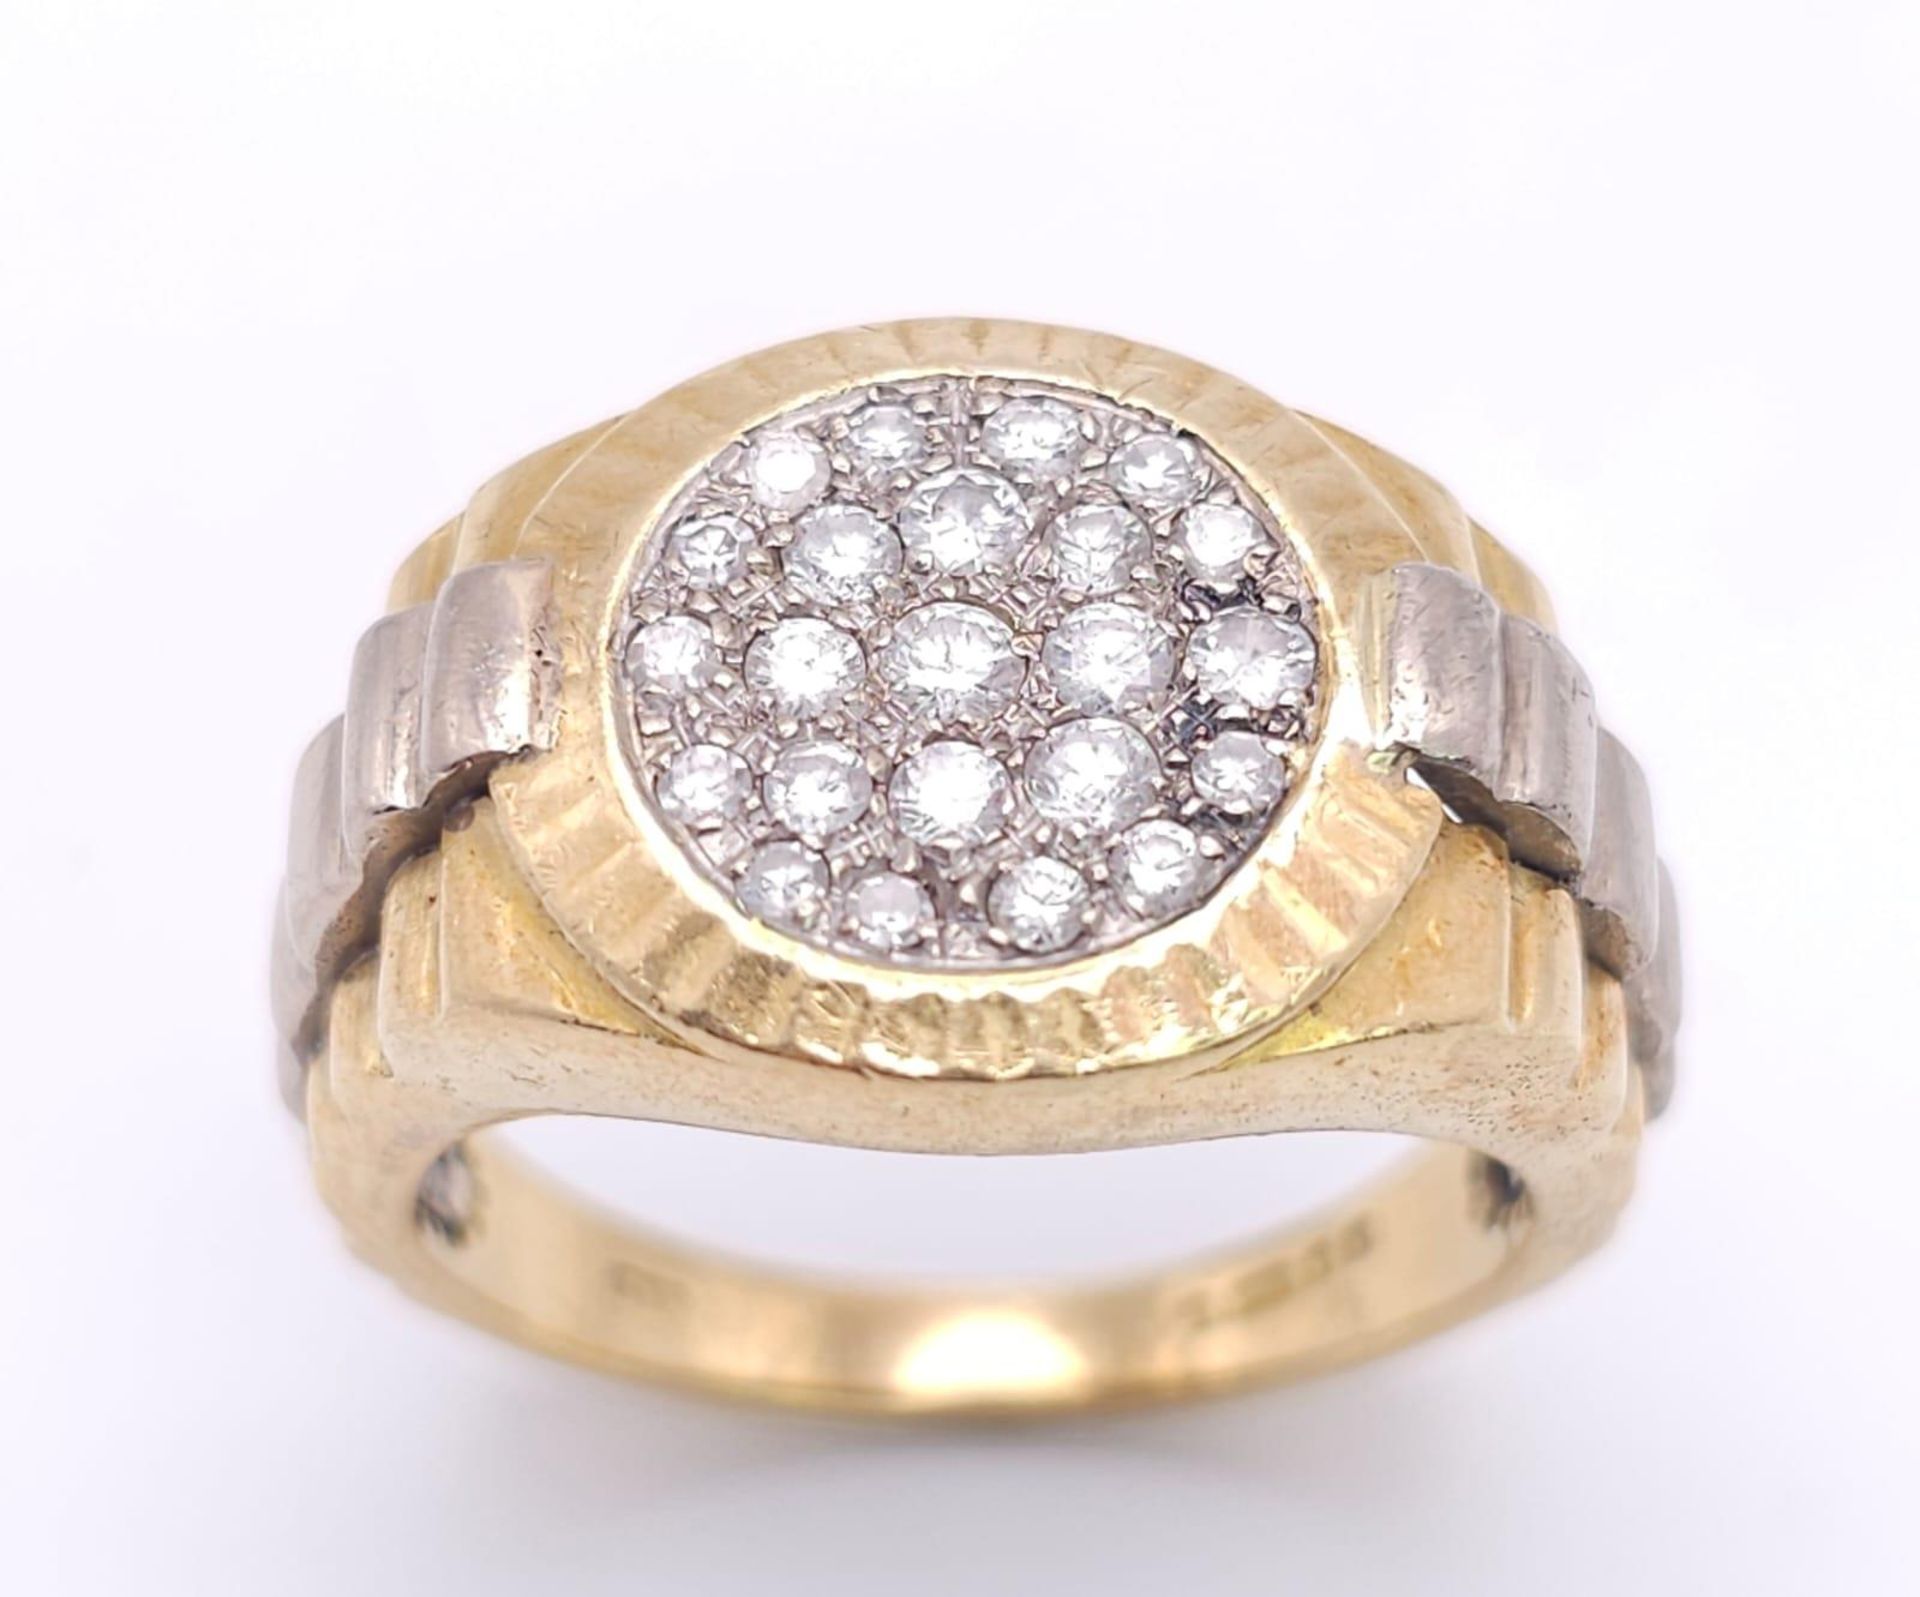 AN IMPRESSIVE 18K 2 COLOUR GOLD DIAMOND SET RING INSPIRED BY THE ROLEX DESIGN, APPROX 0.50CT